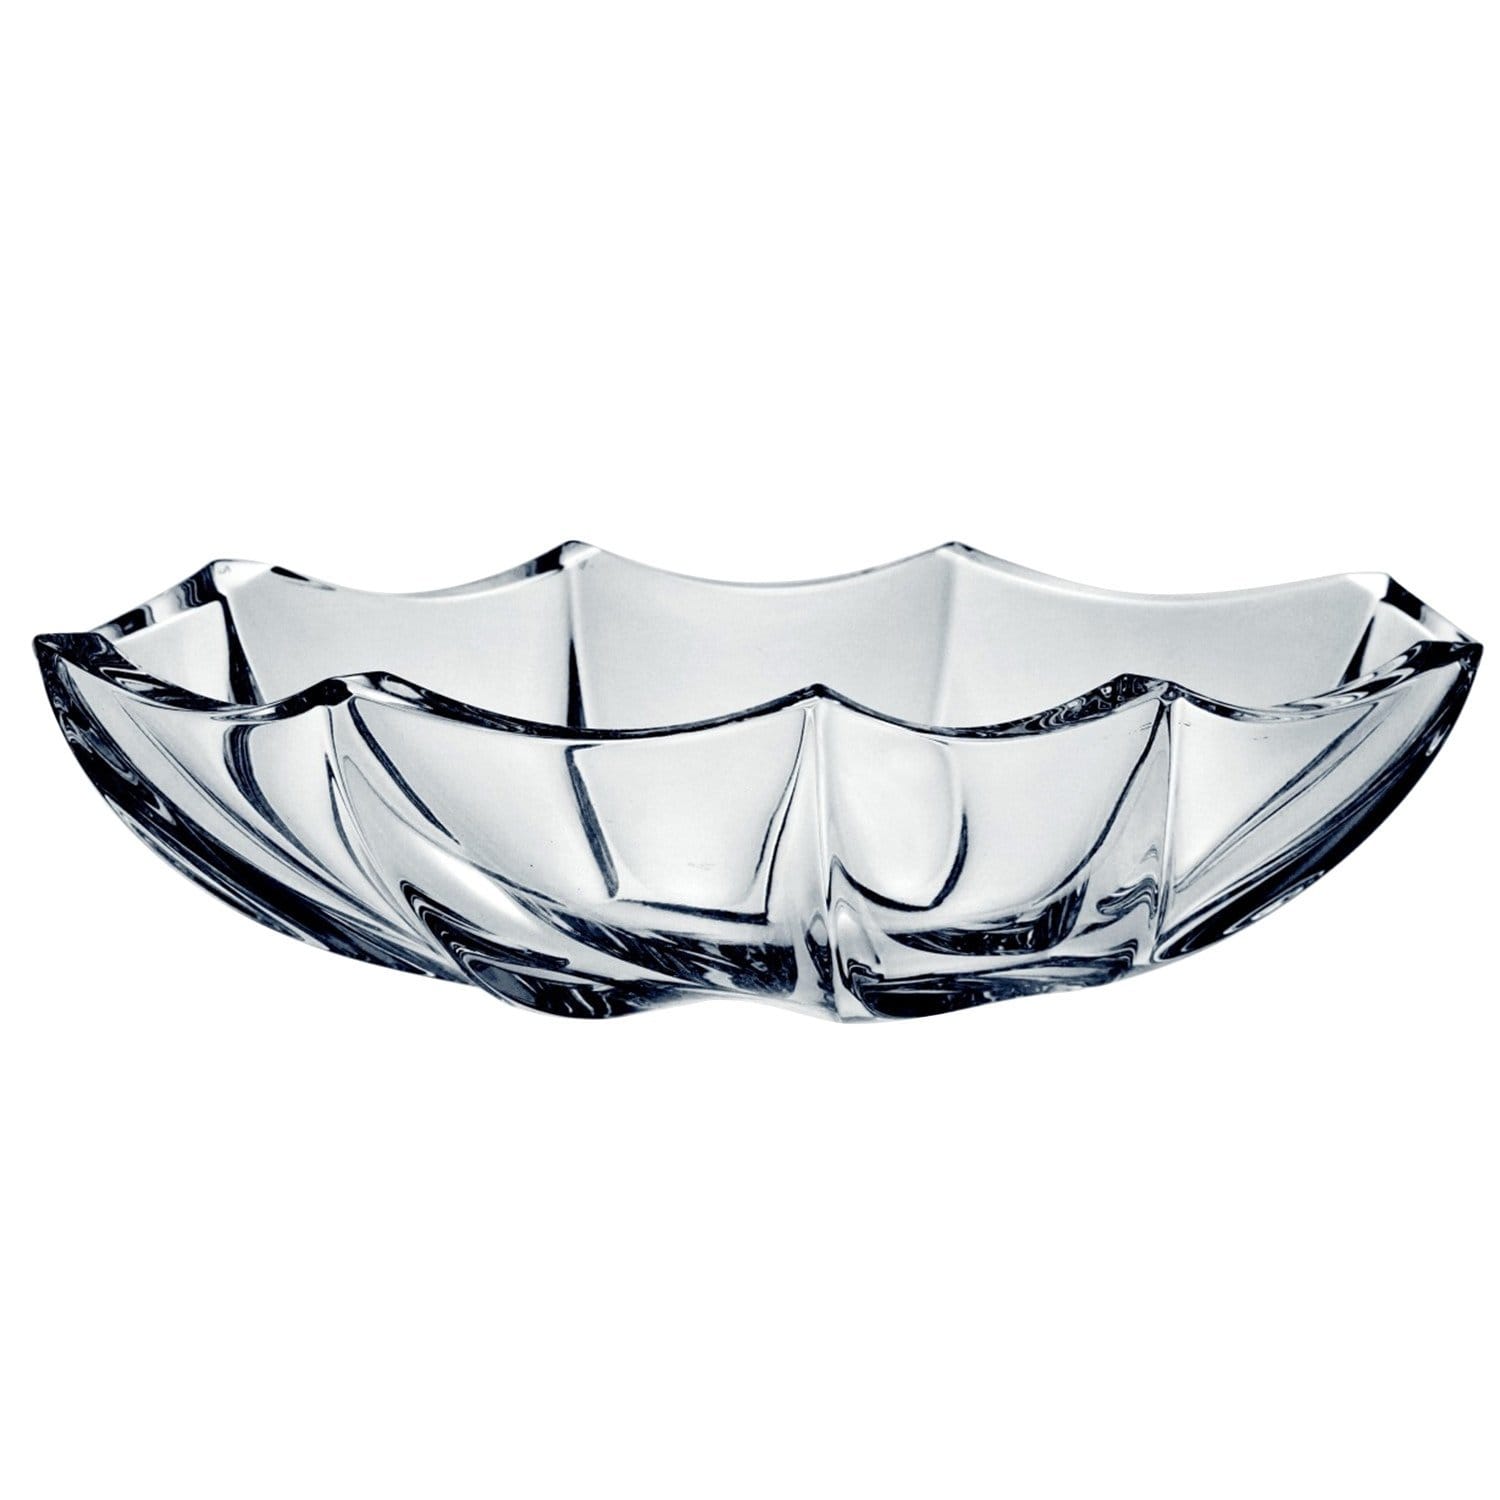 Che Crystal Calypso Oval Bowl - Clear - 84/69K44/0/93K69/390 - Jashanmal Home